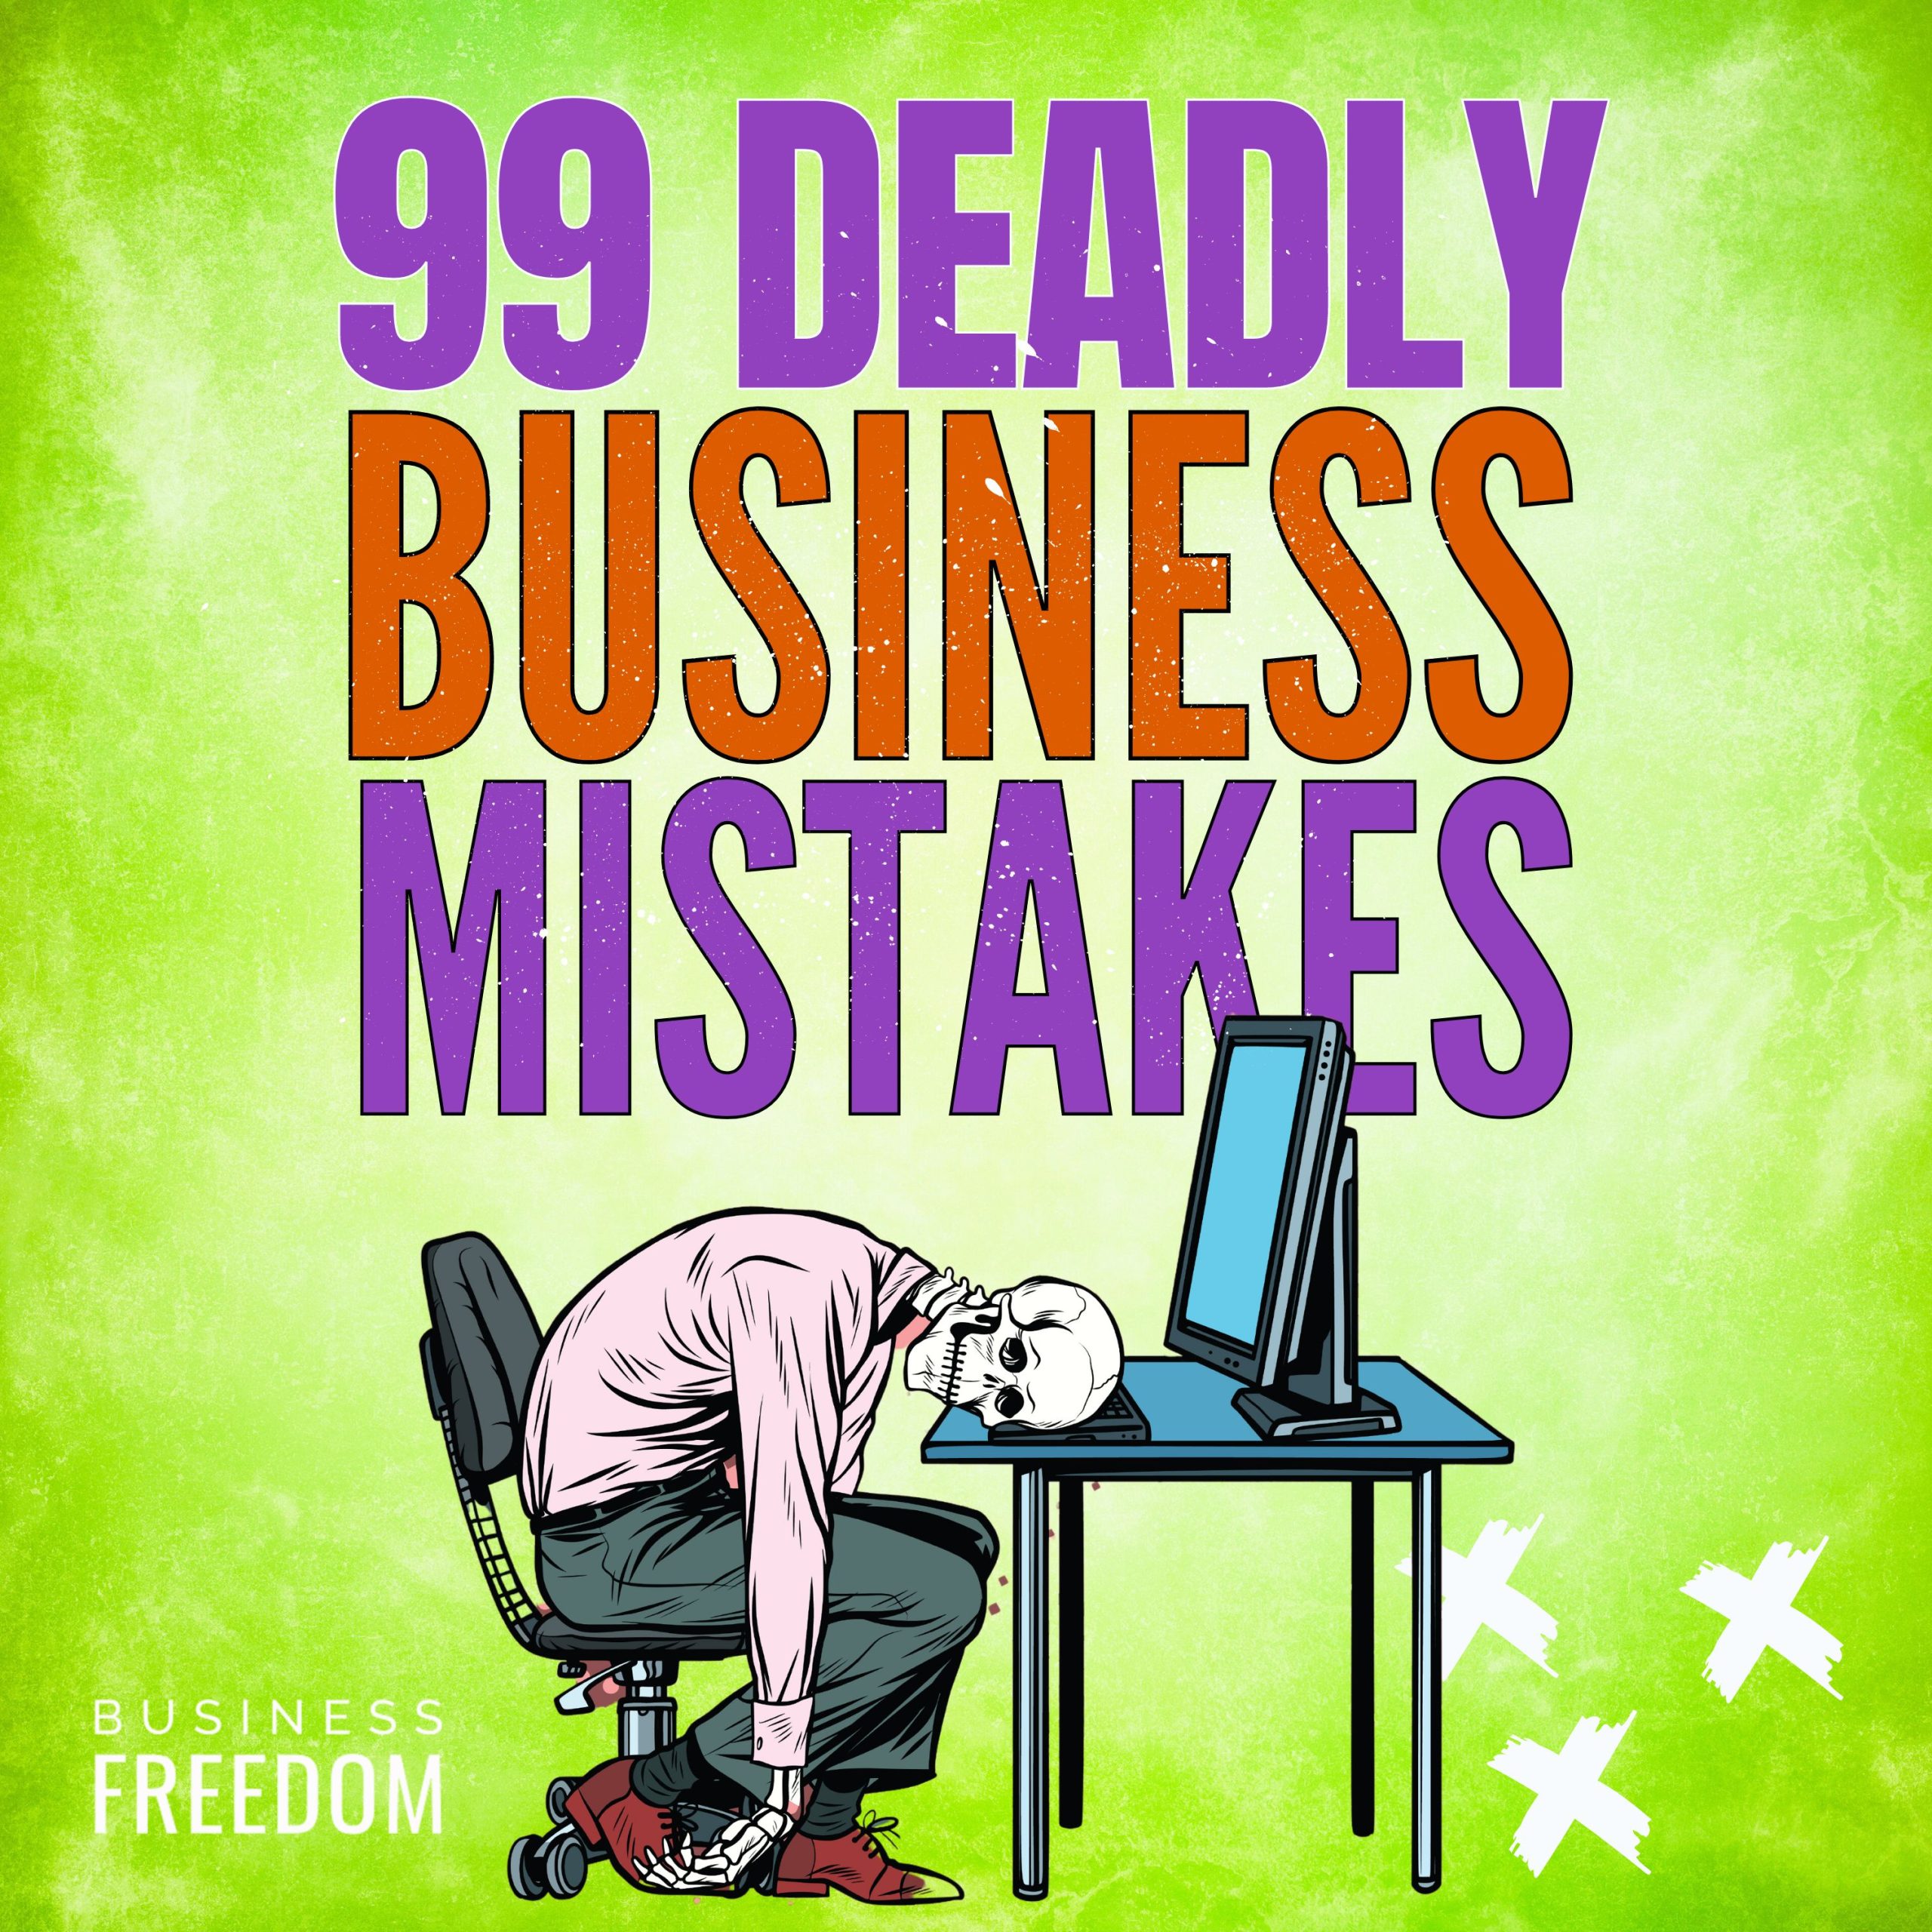 99 Deadly Business Mistakes